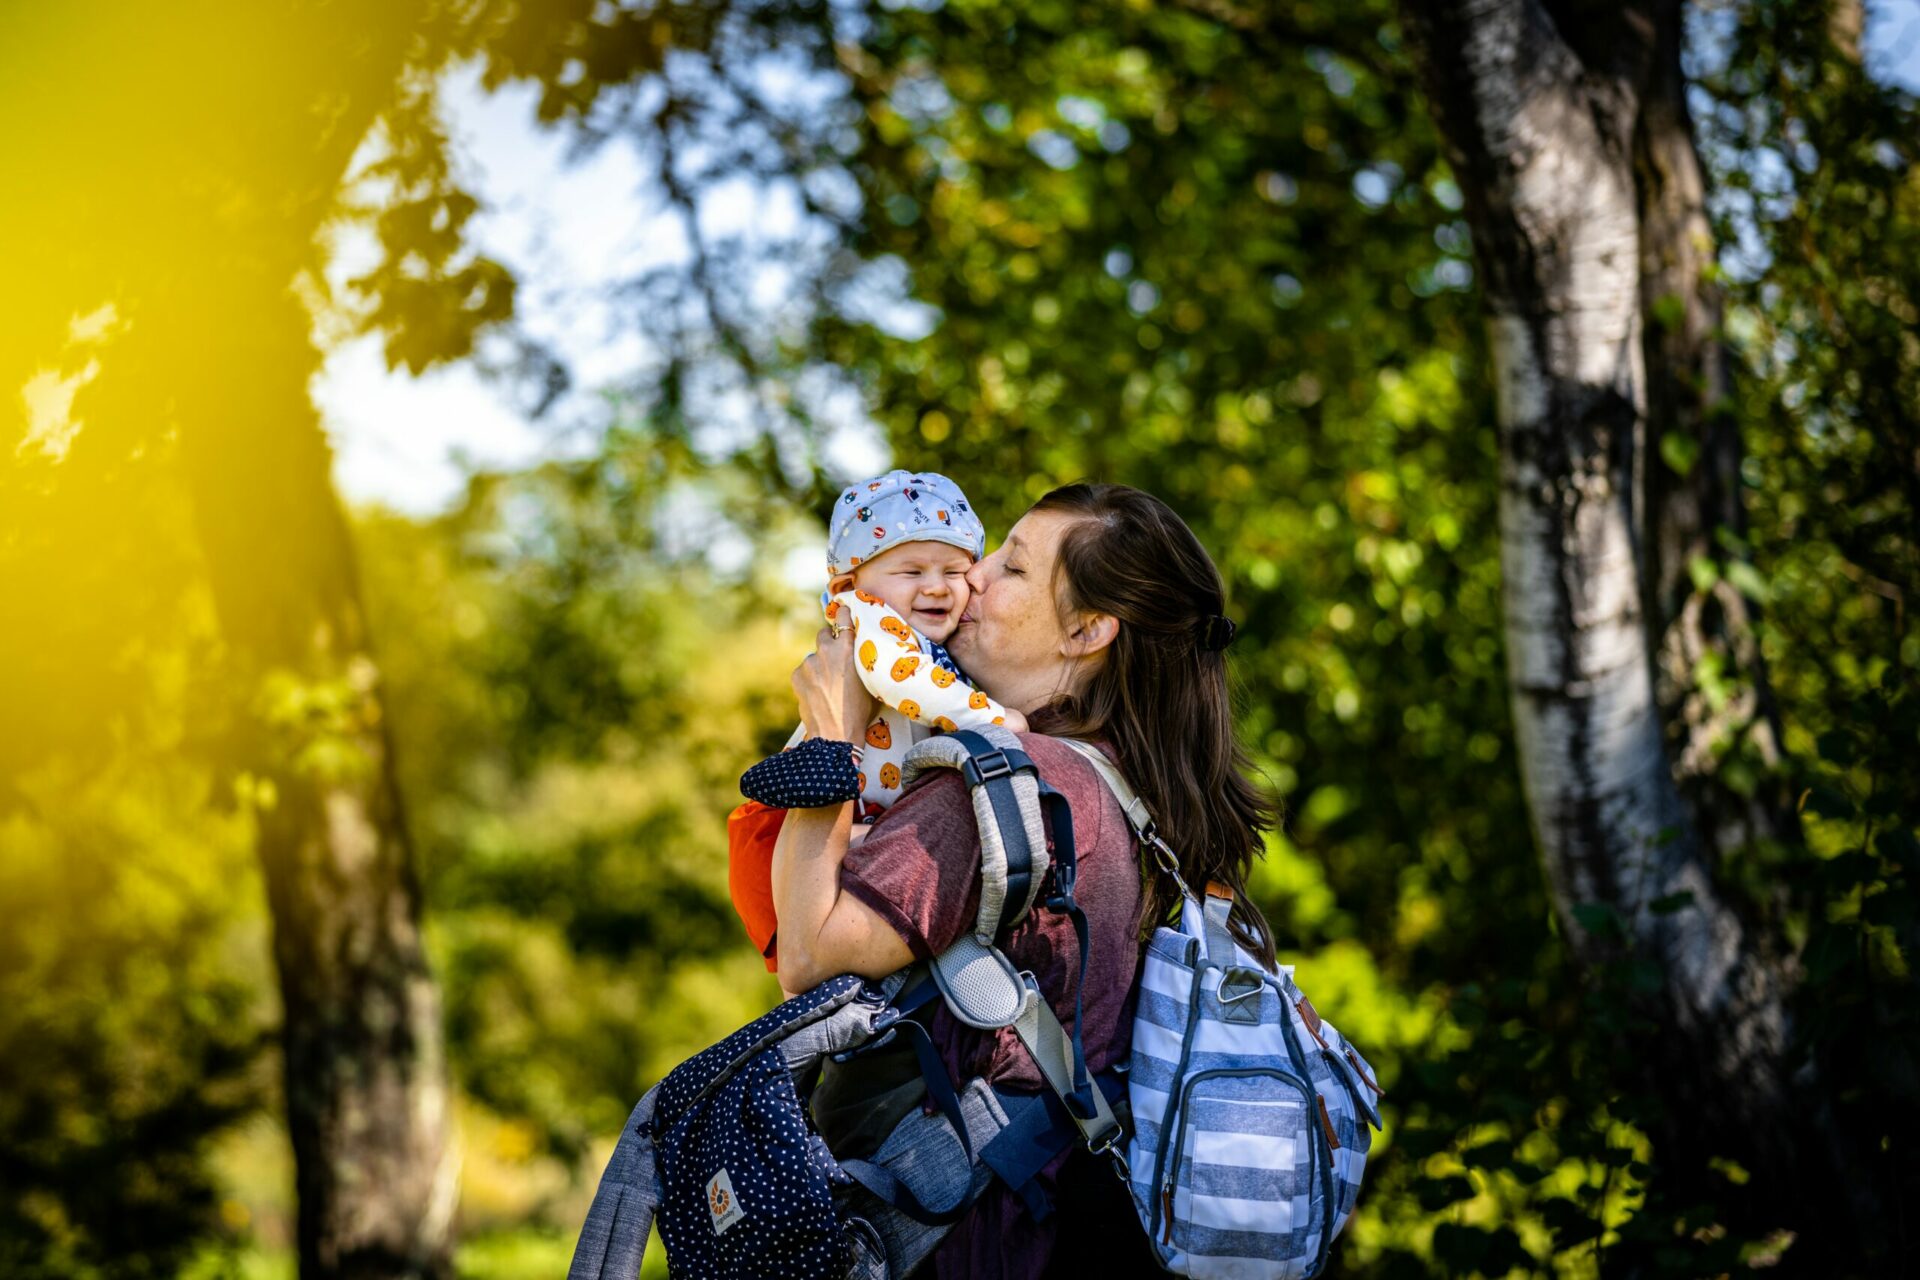 Eco-friendly baby carriers